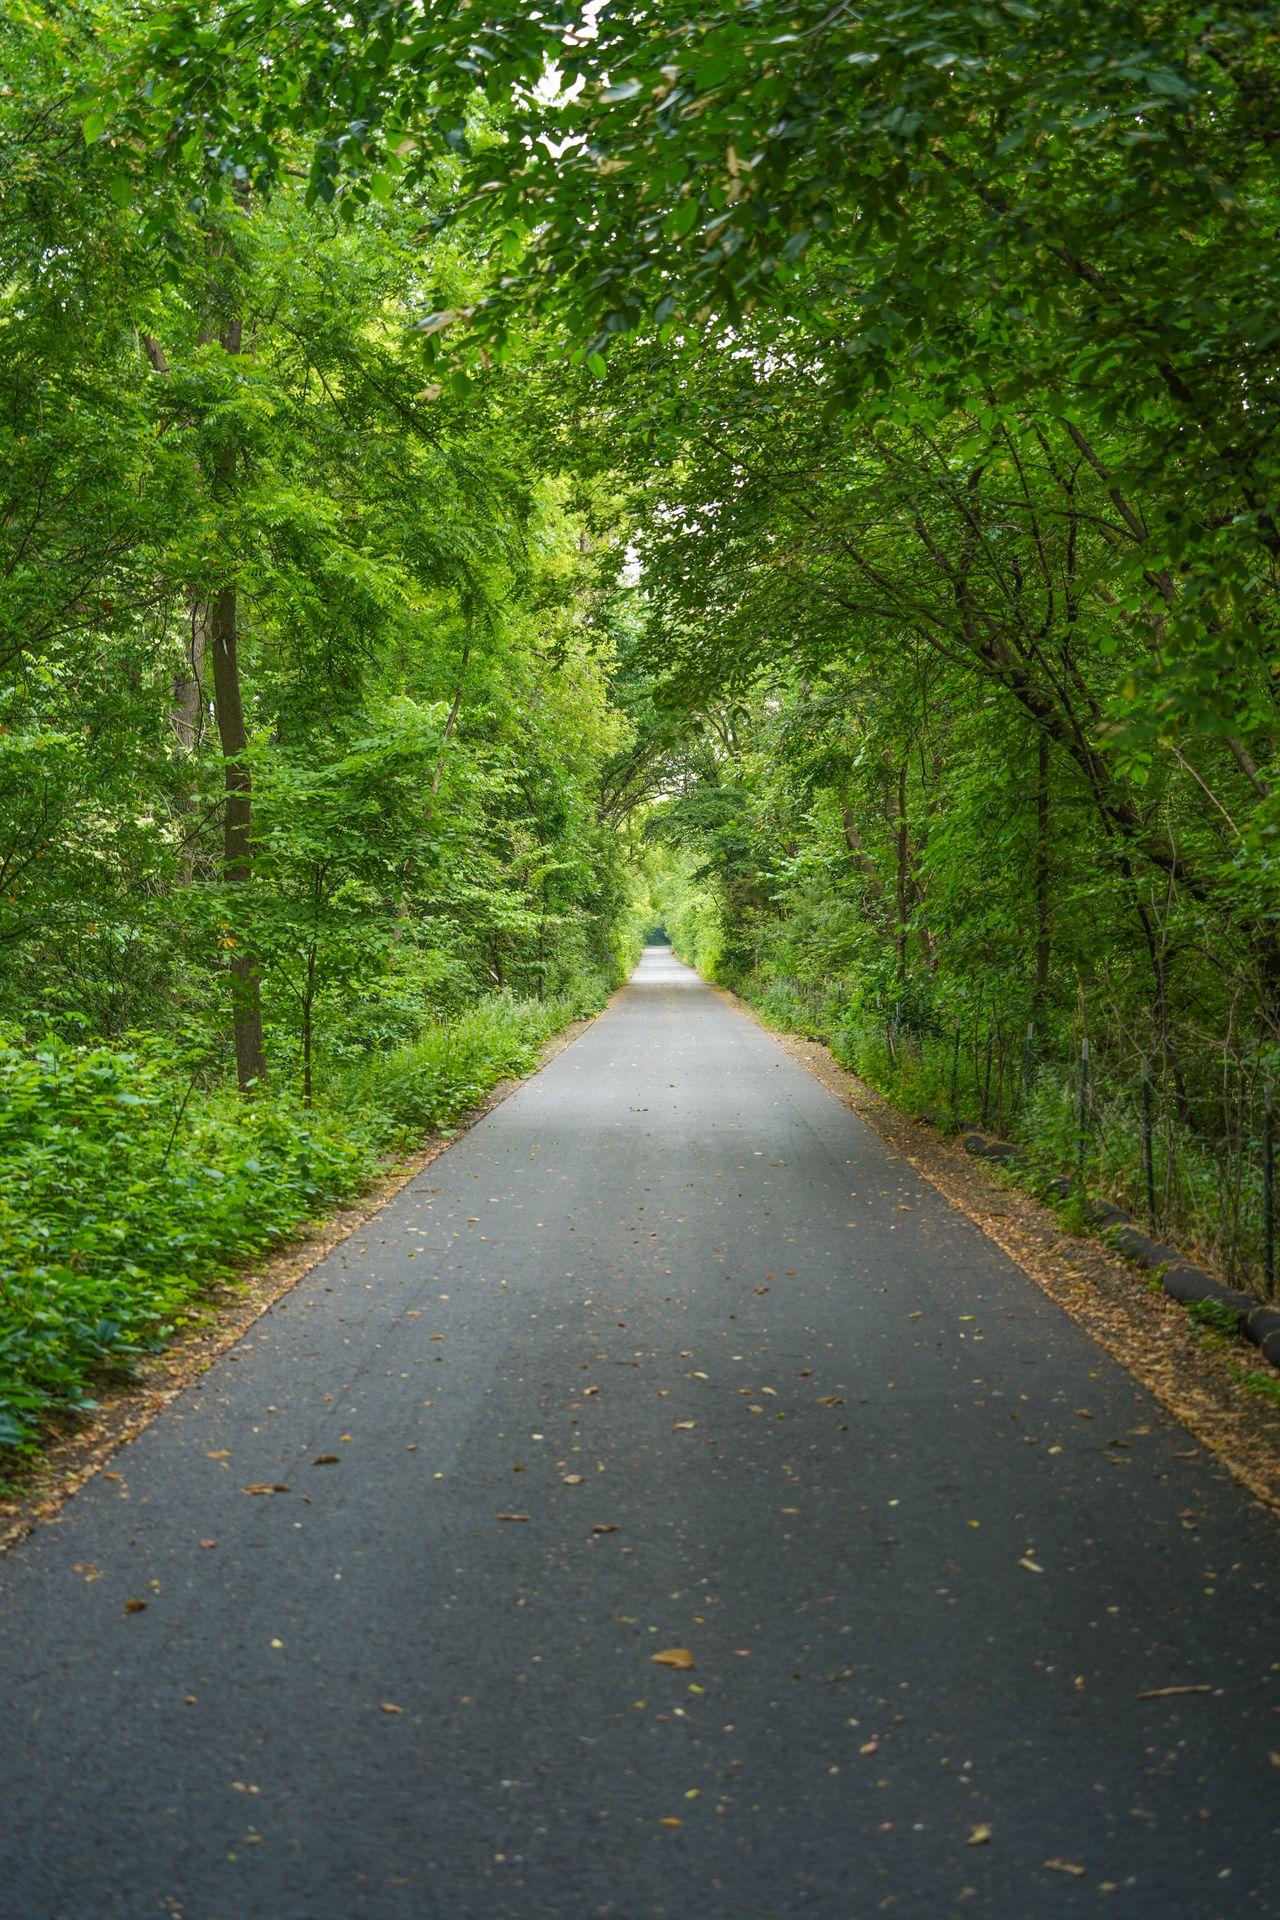 A paved pathway with trees and greenery on both sides